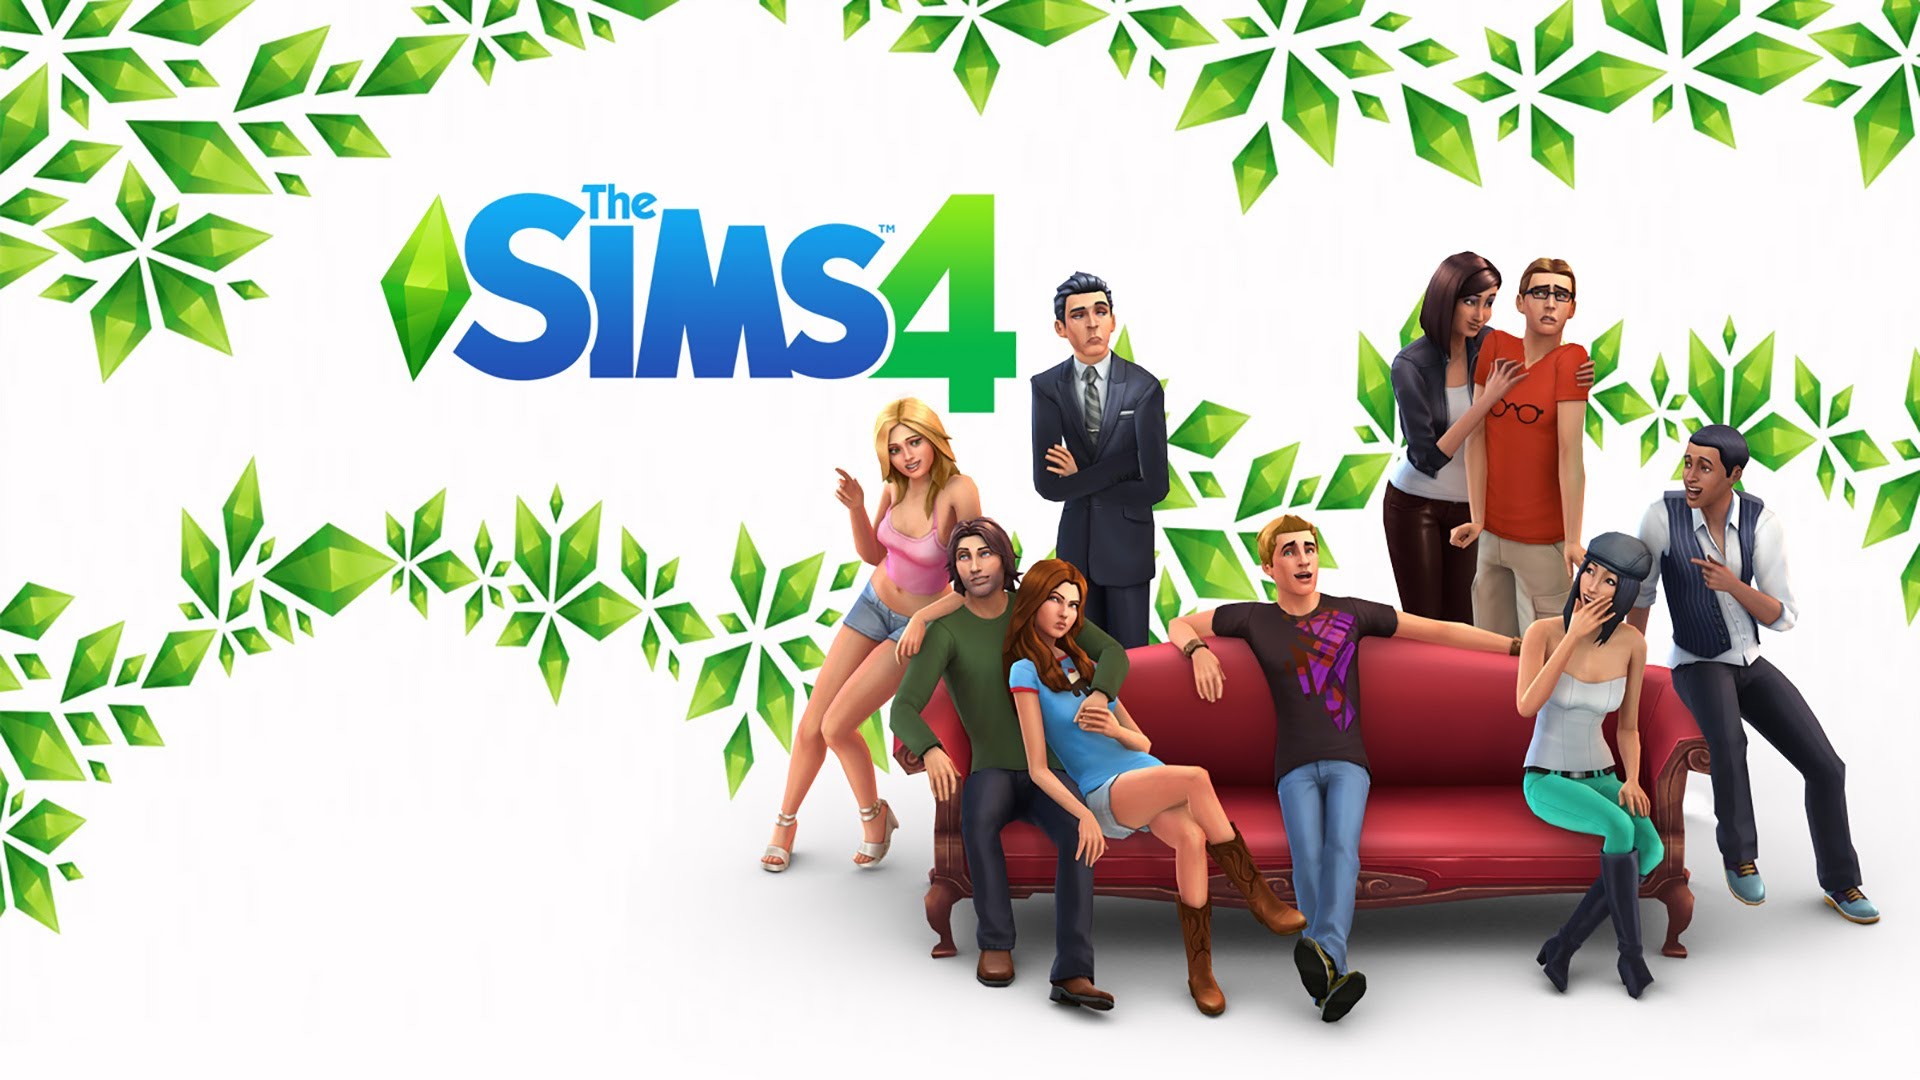 Sims 4 ps4 price